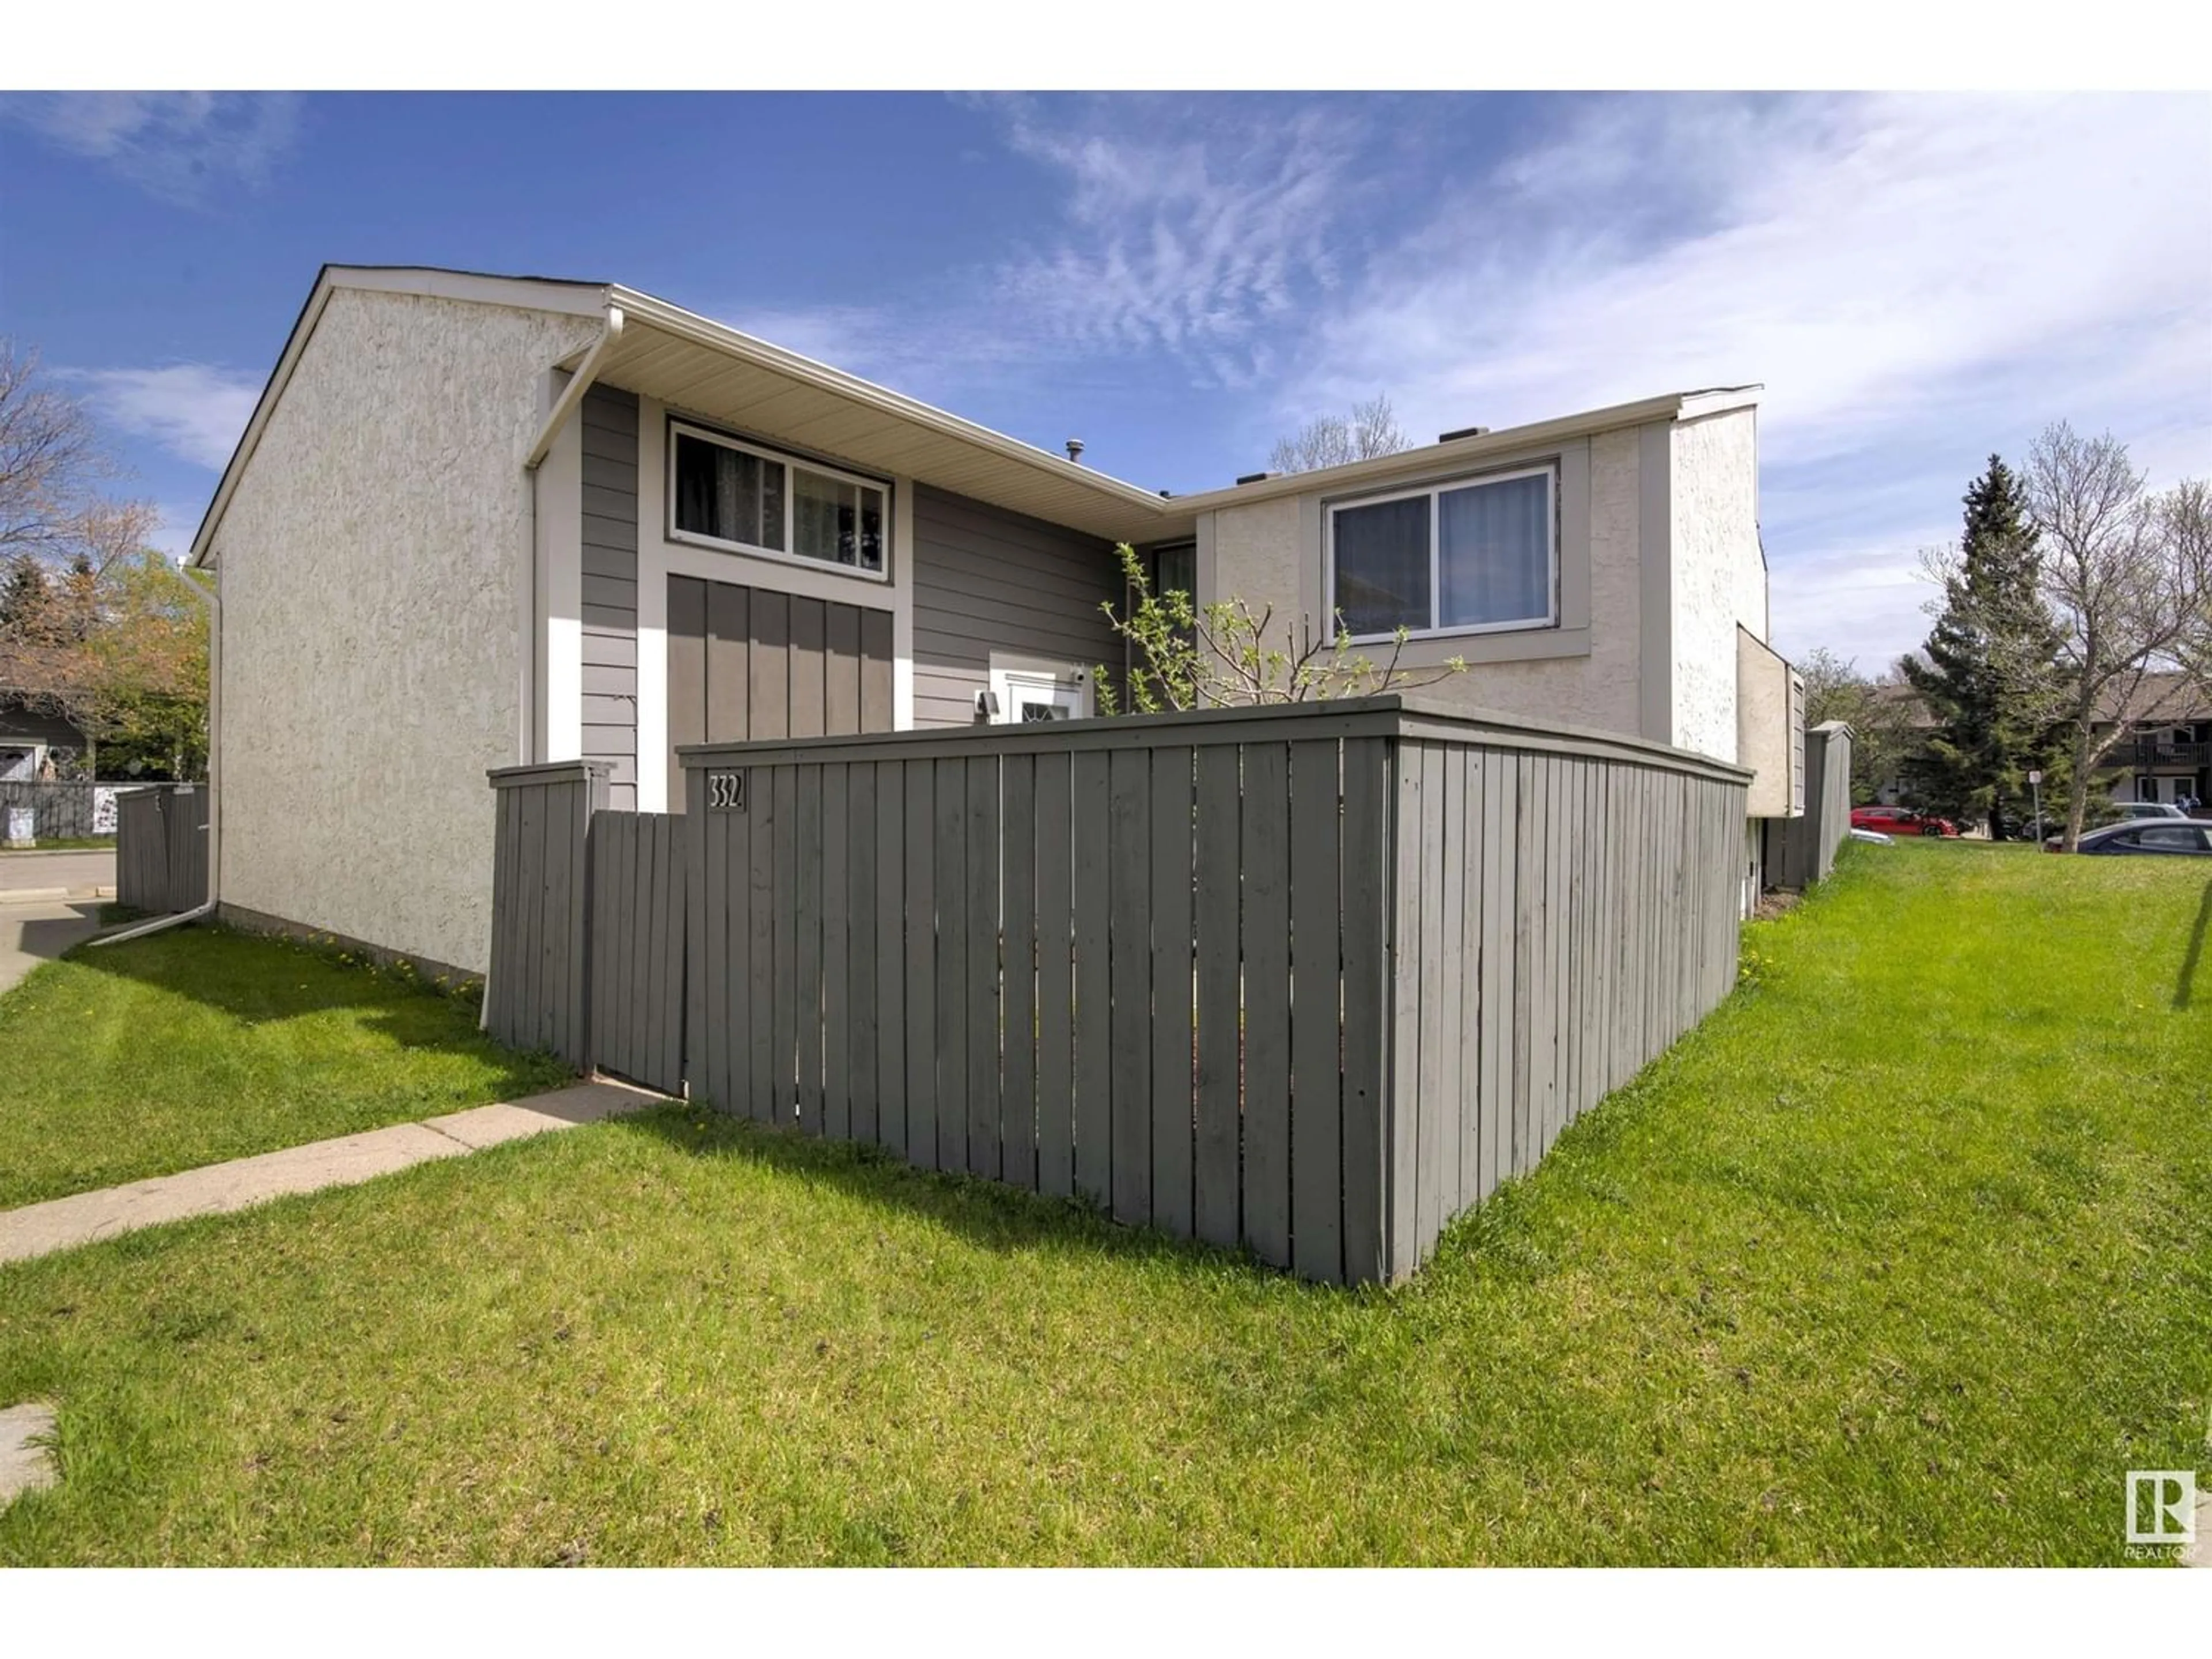 Fenced yard for 332 WILLOW CO NW, Edmonton Alberta T5T2K7